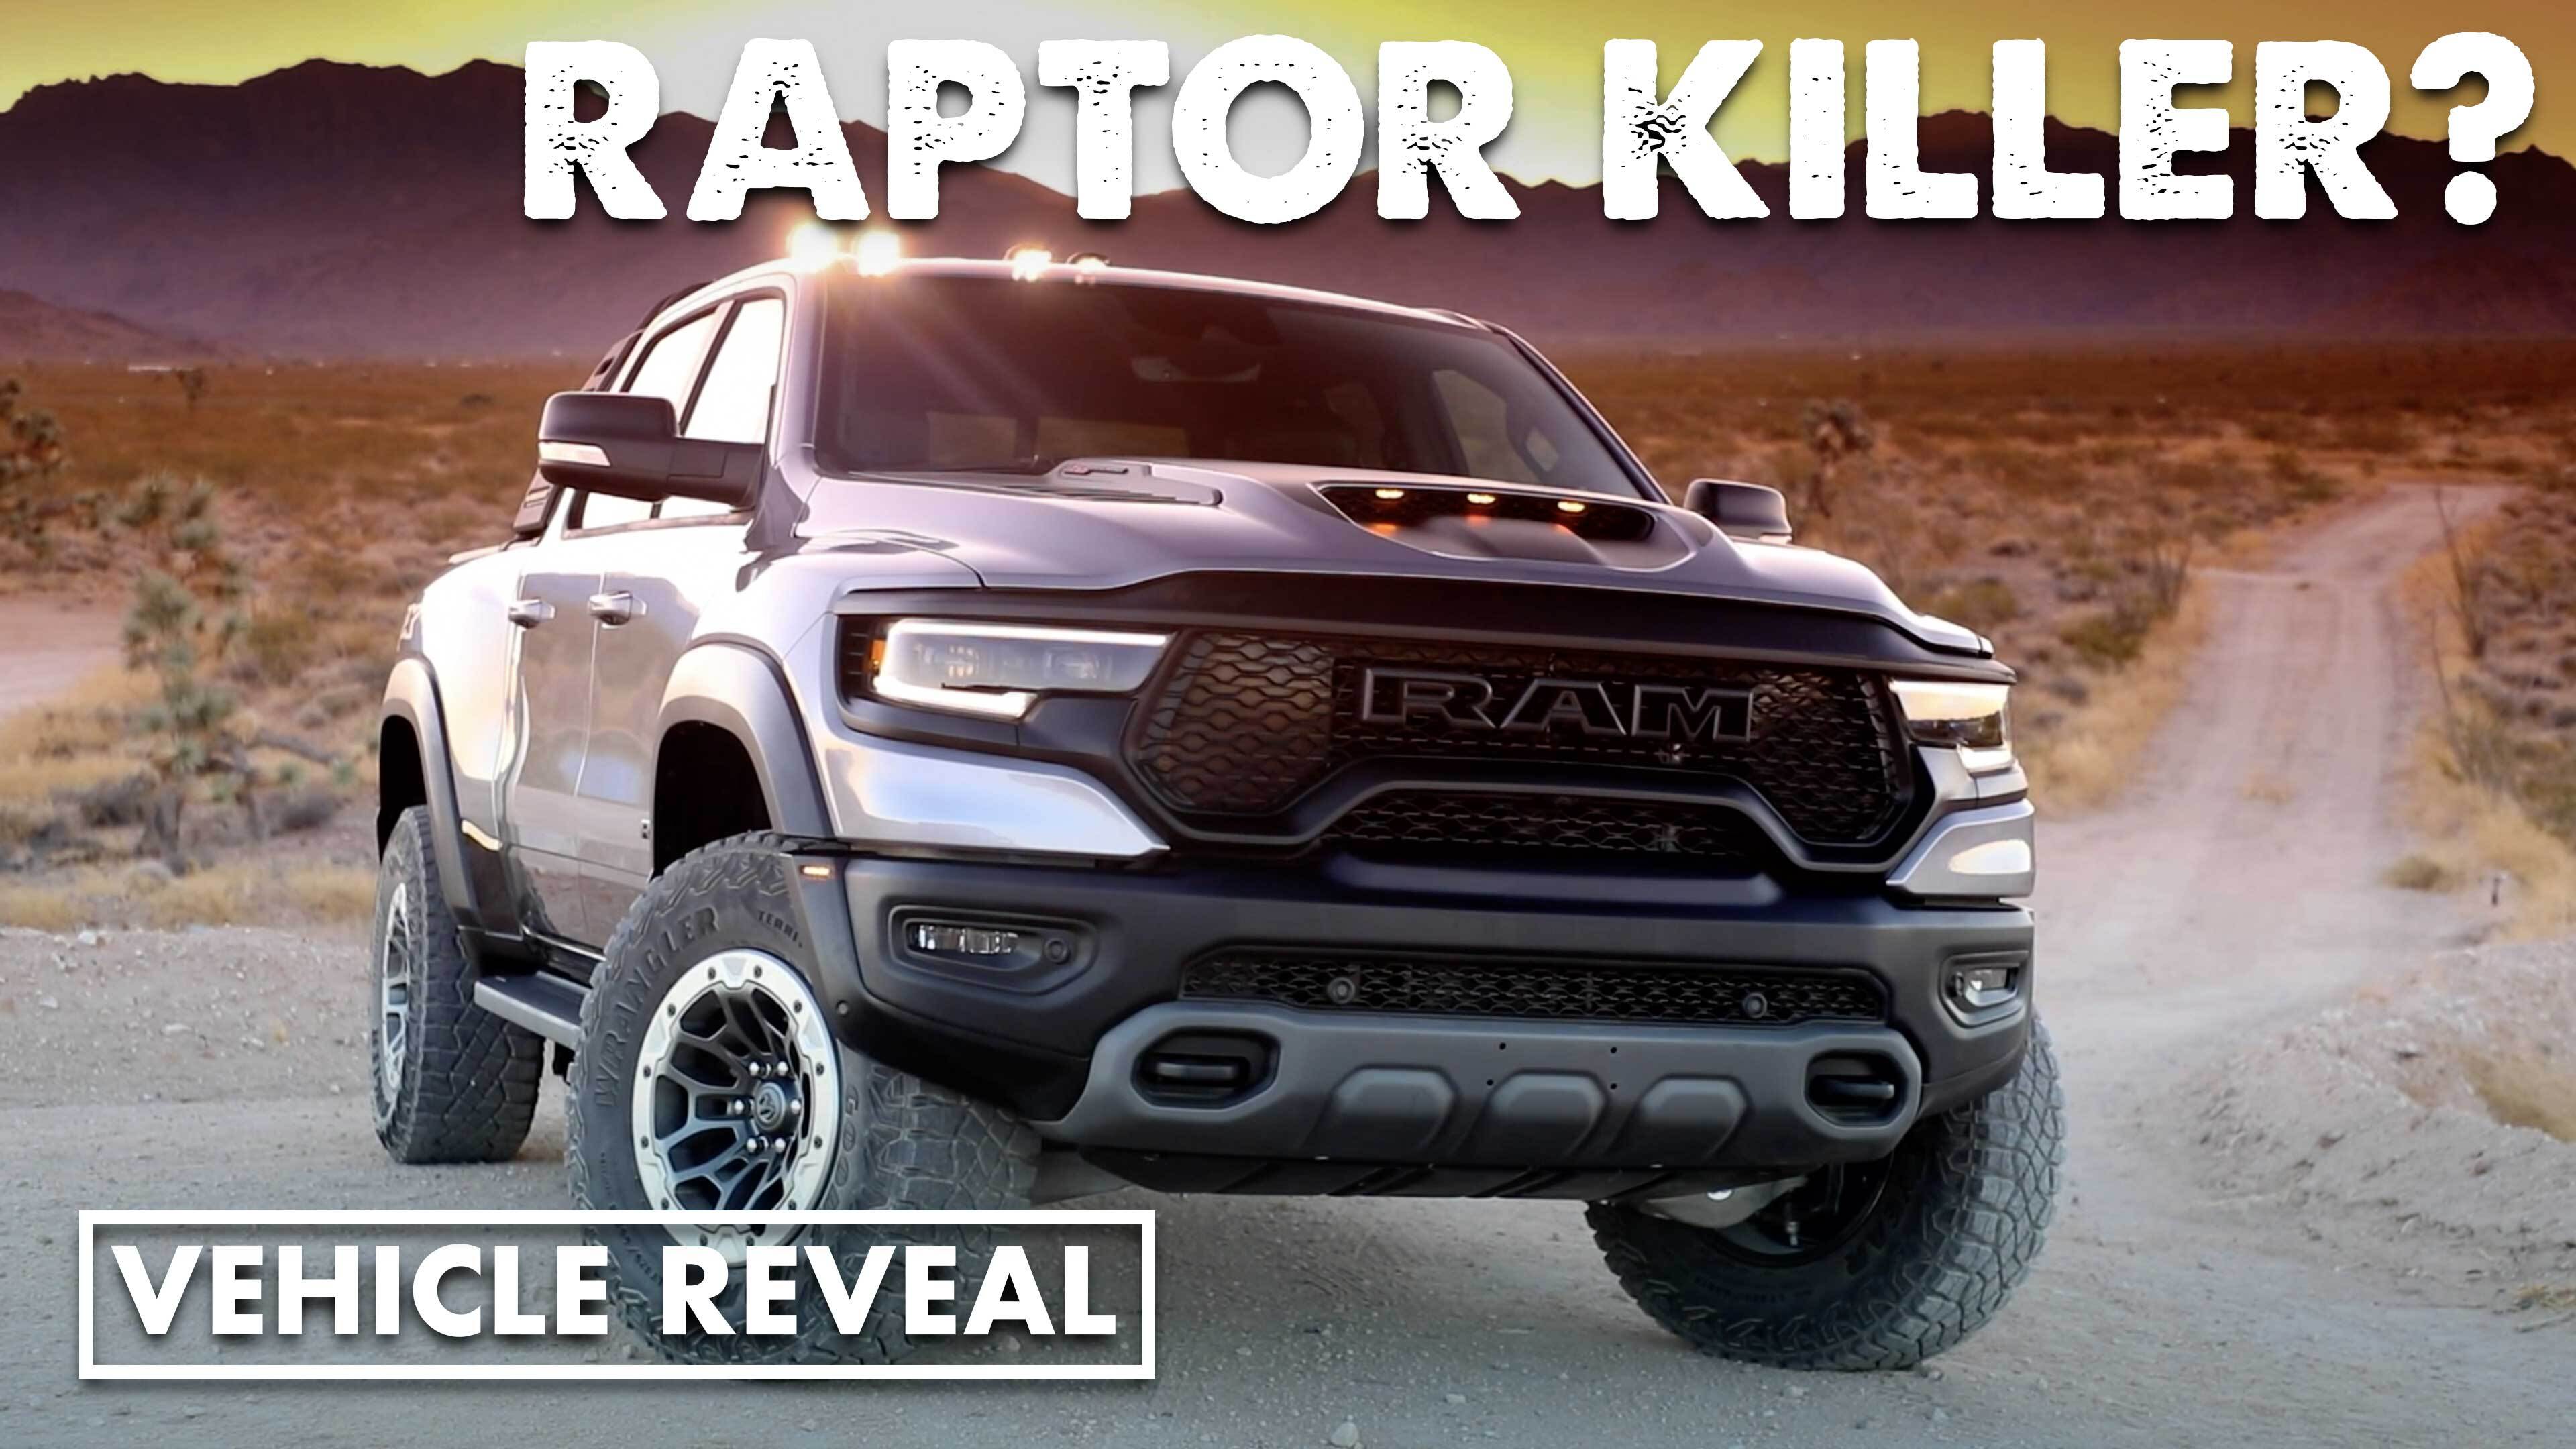 The 2021 Ram 1500 TRX is the most intense off-road truck ever built